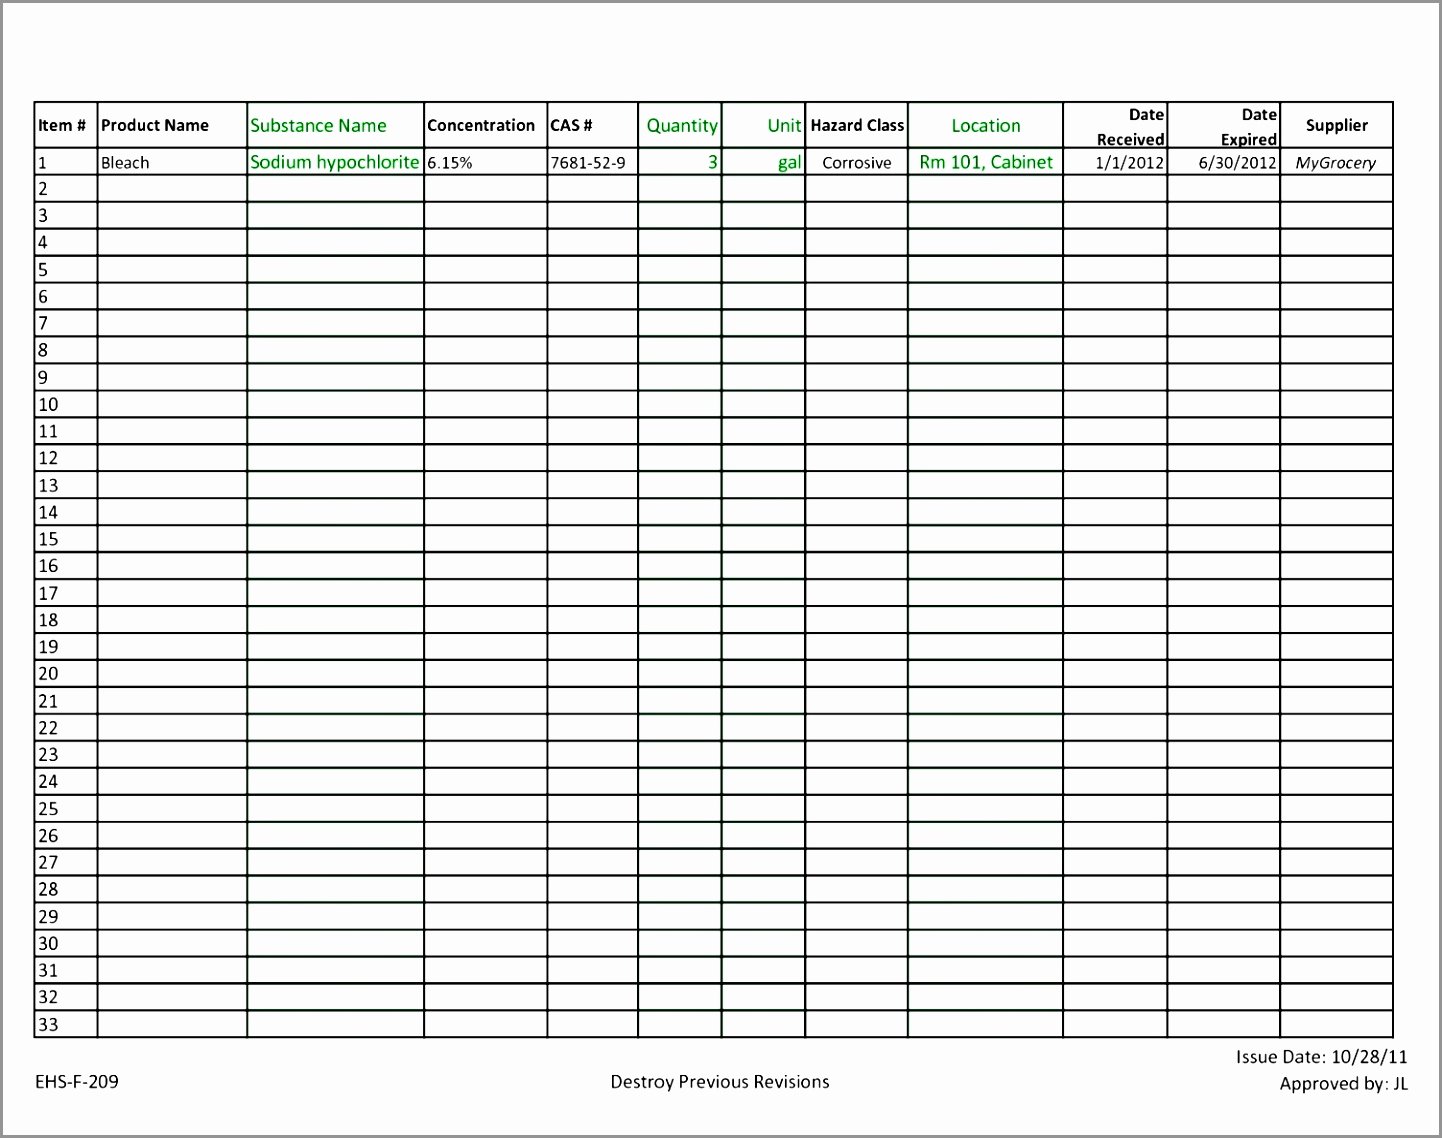 Chemical Inventory List Template